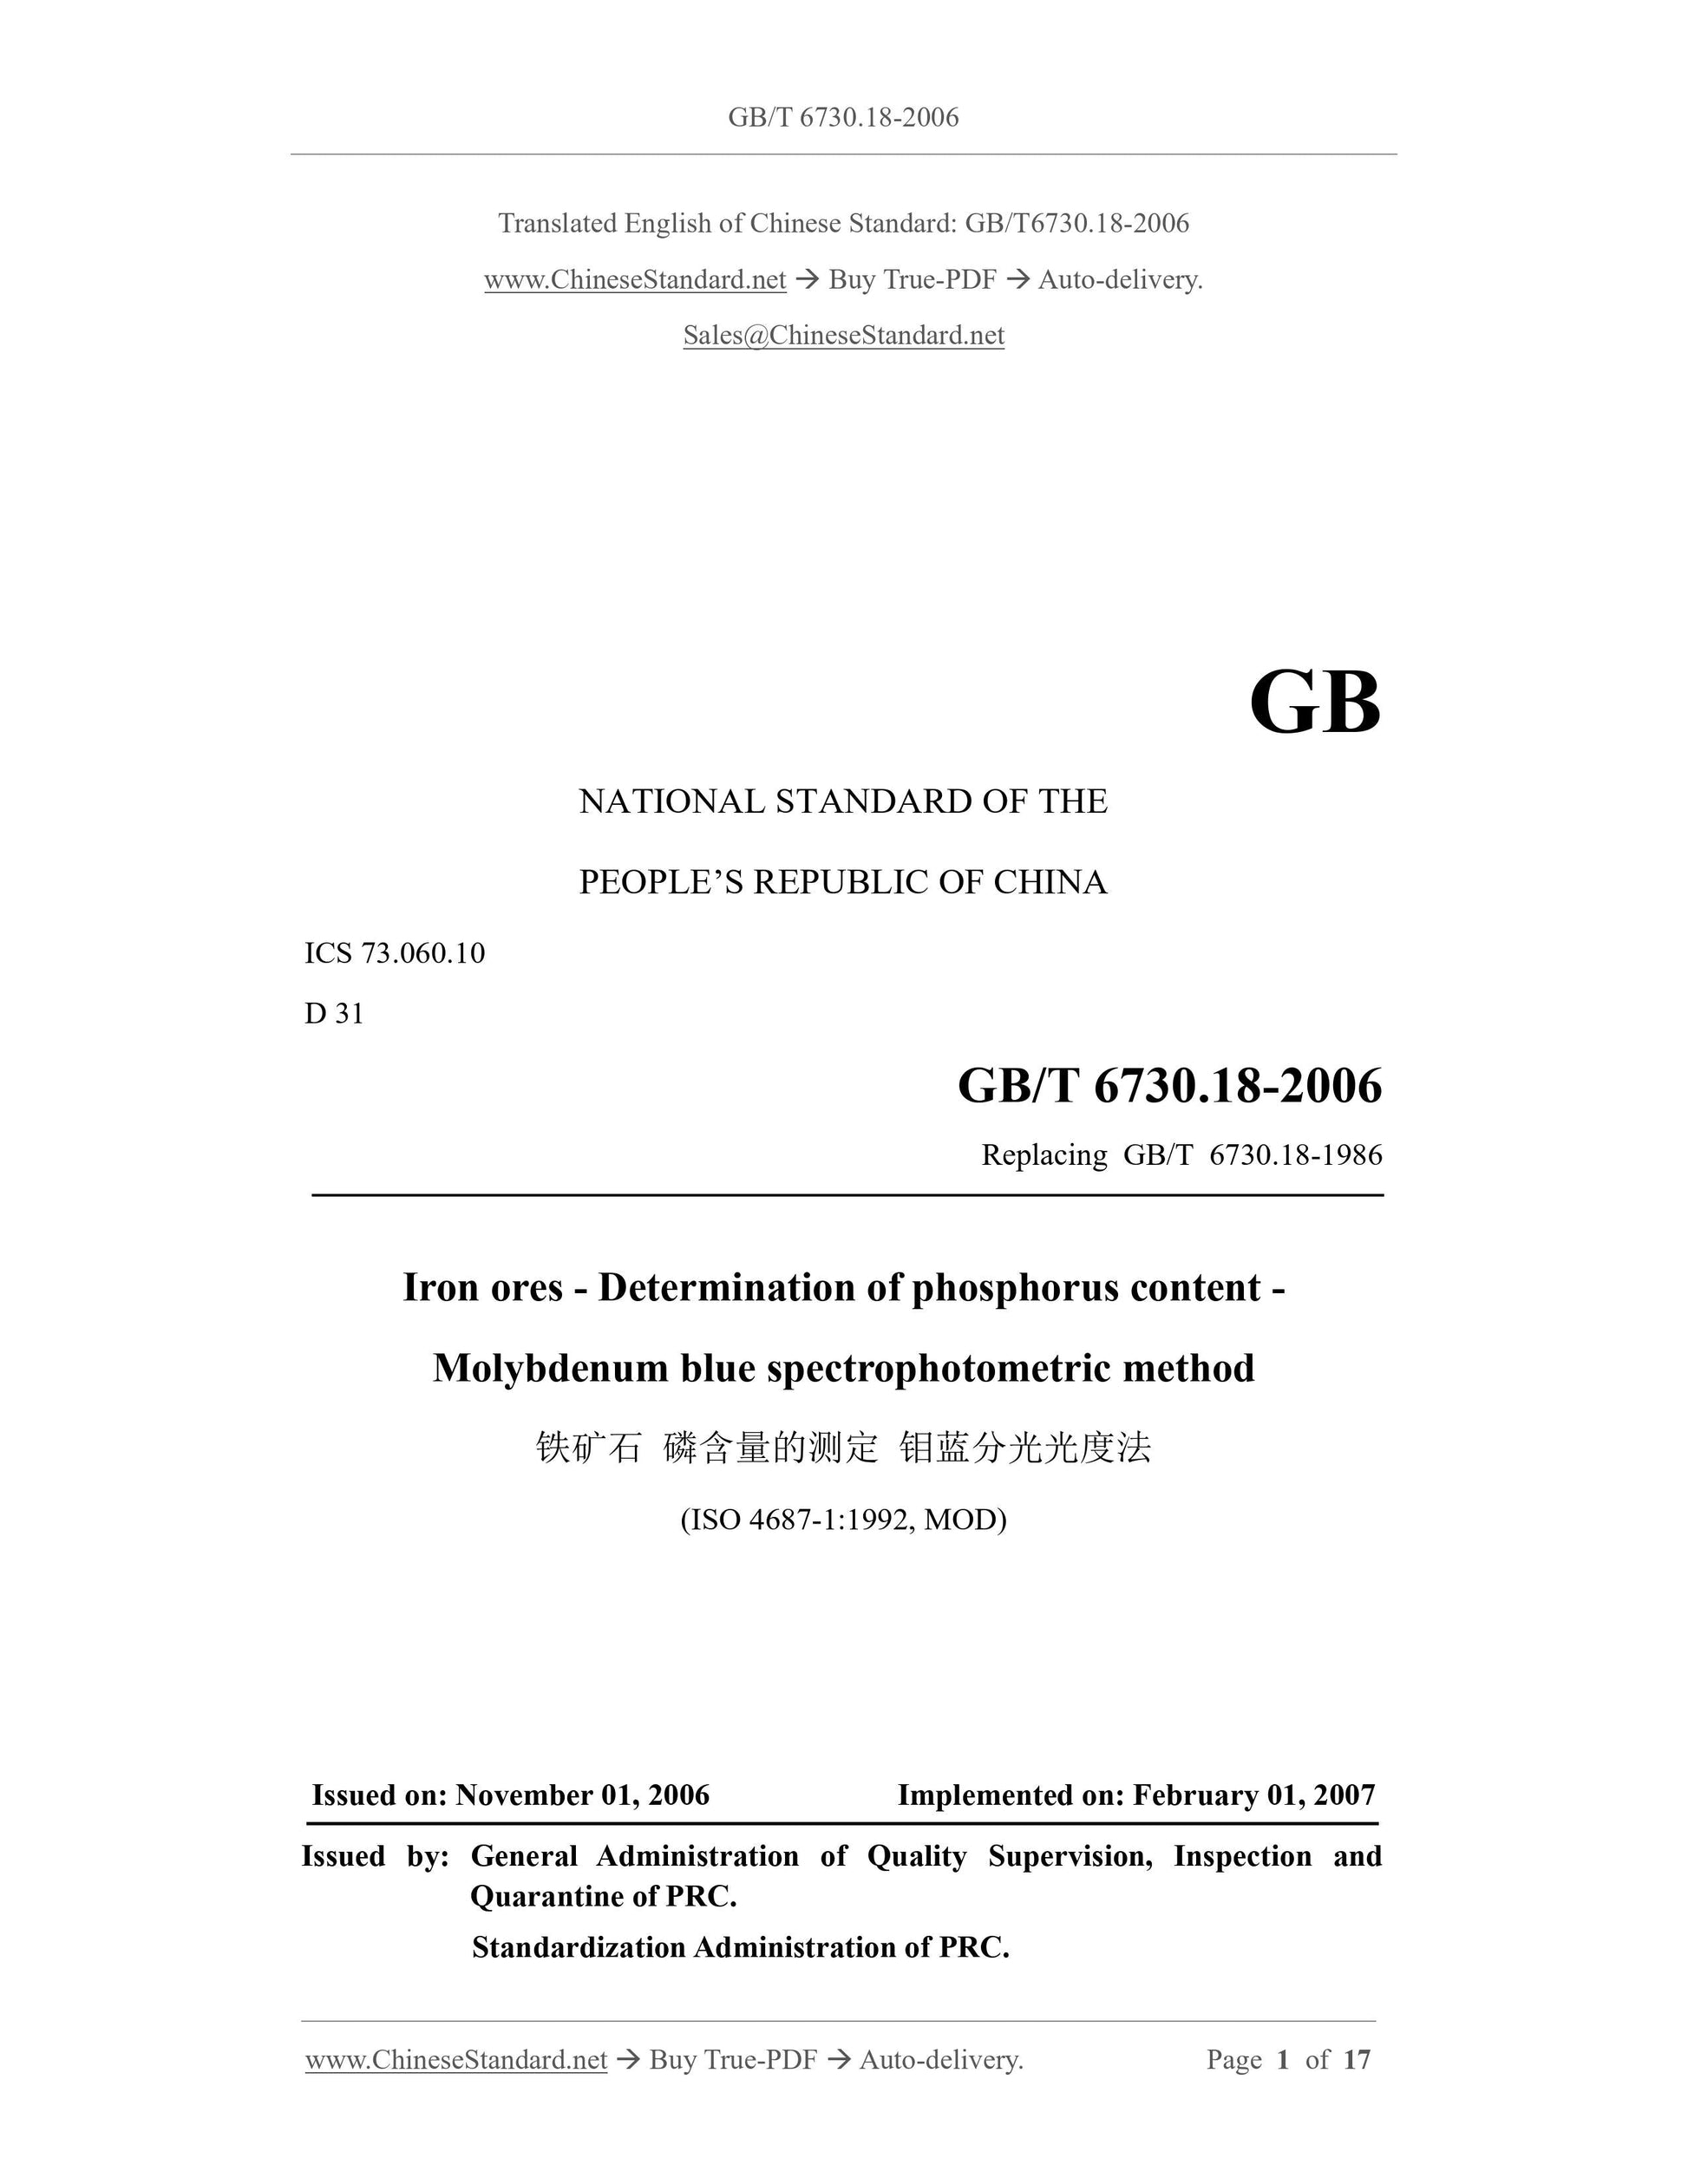 GB/T 6730.18-2006 Page 1